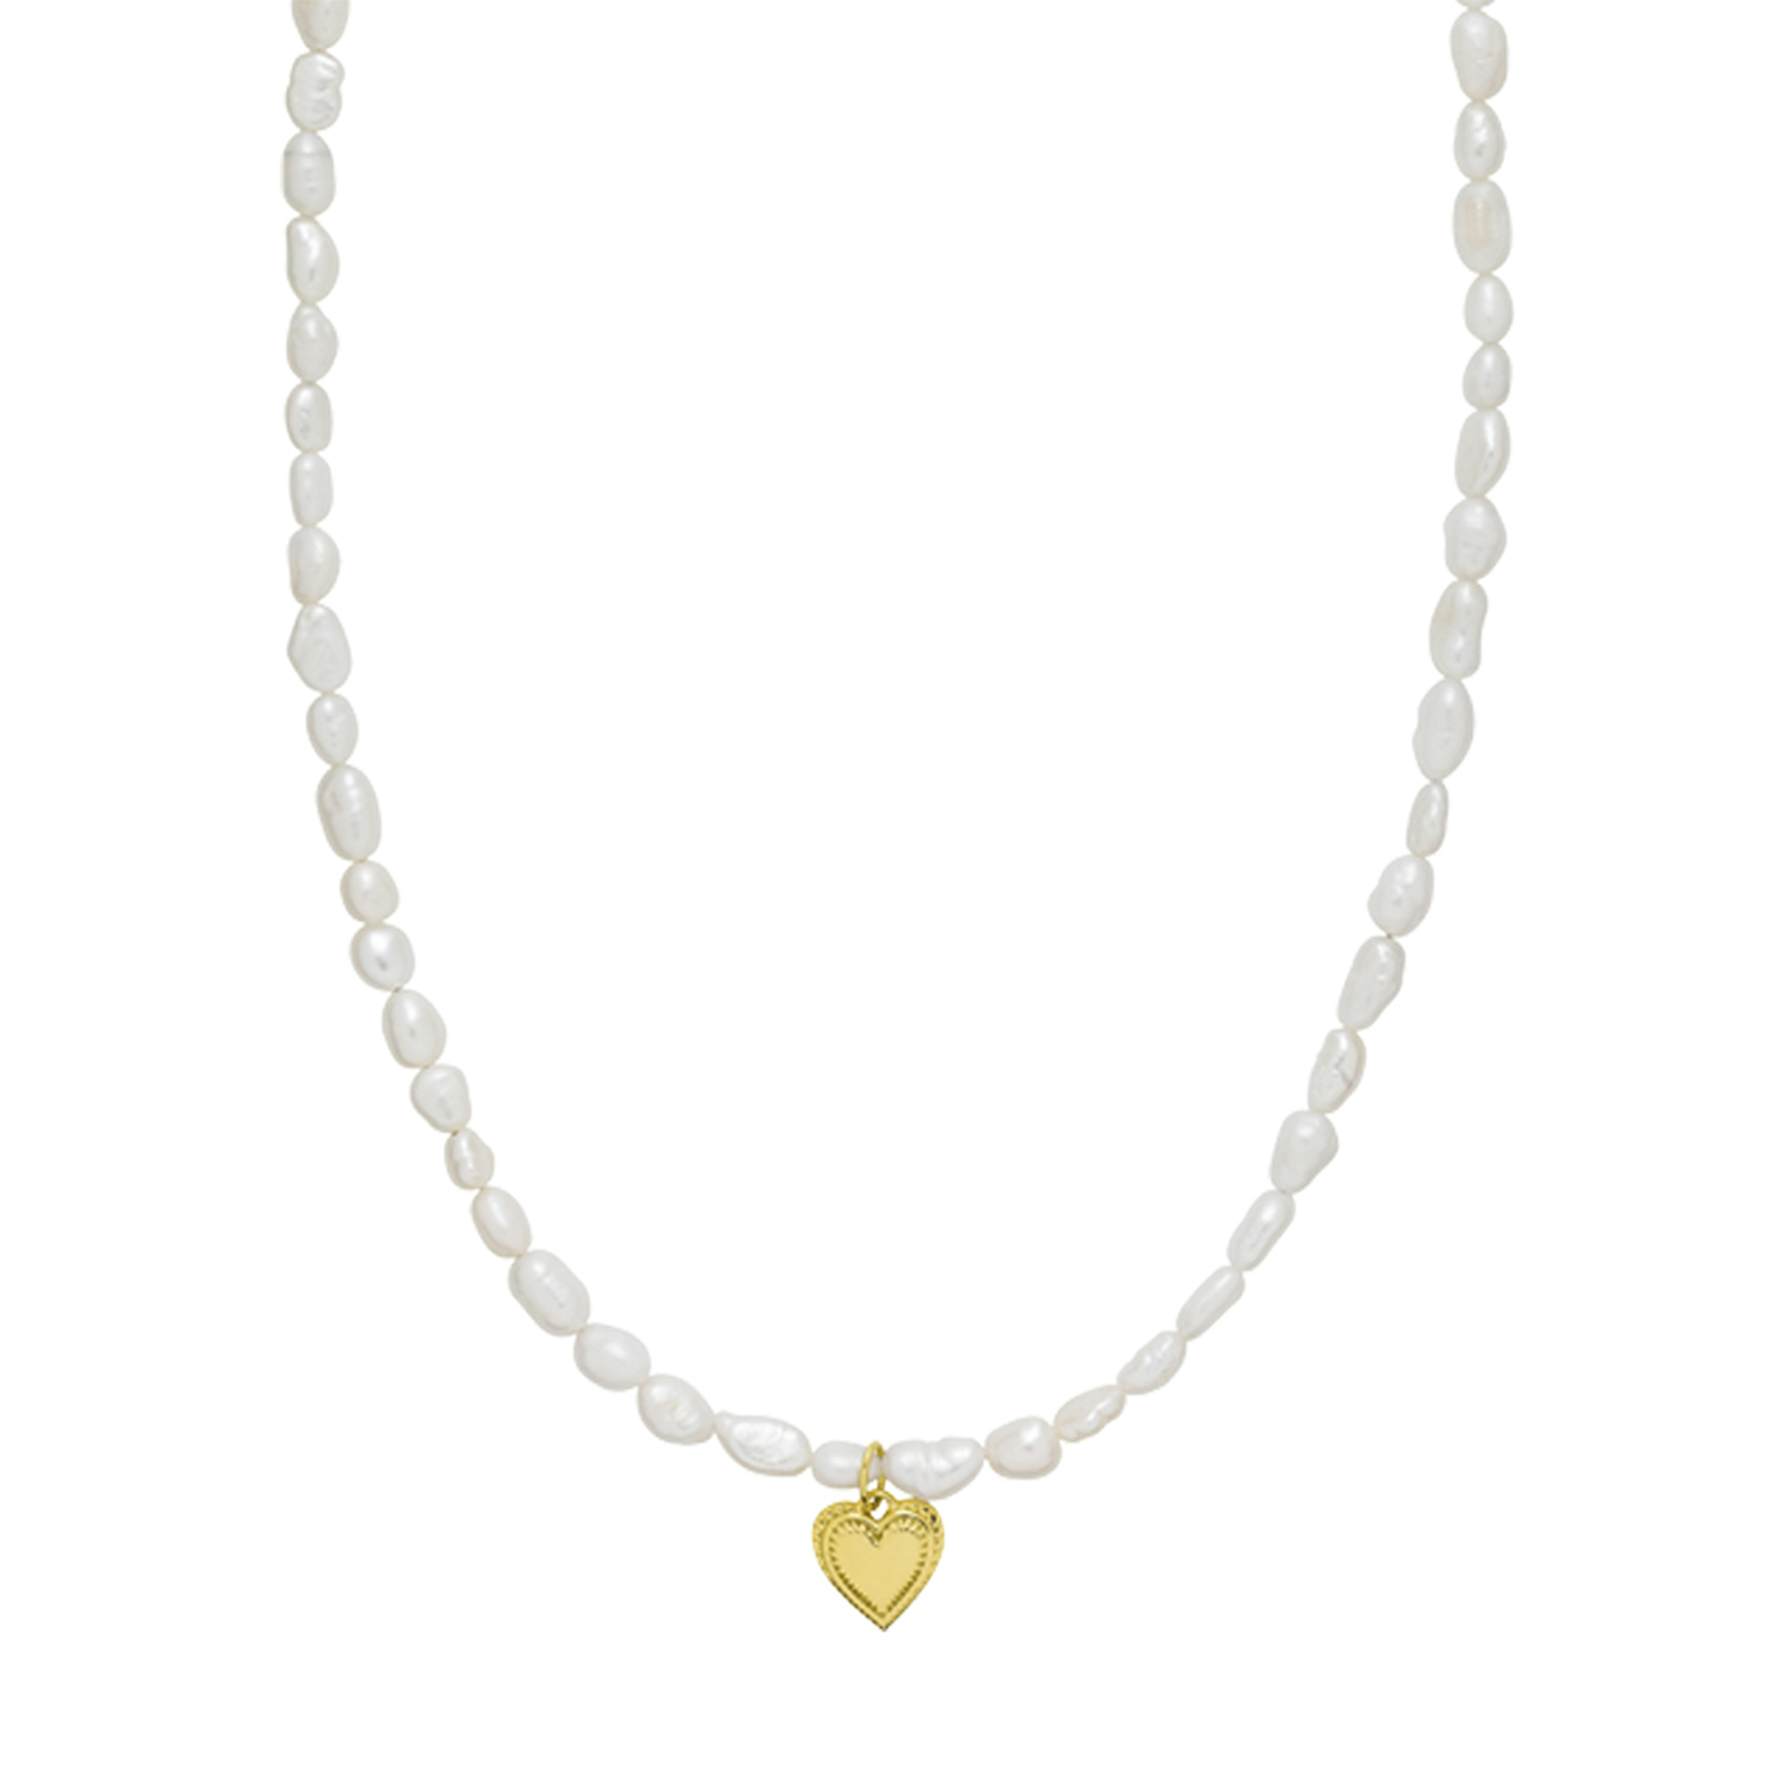 Anne-Sofie Krab x Sistie Heart Necklace from Sistie in Goldplated-Silver Sterling 925